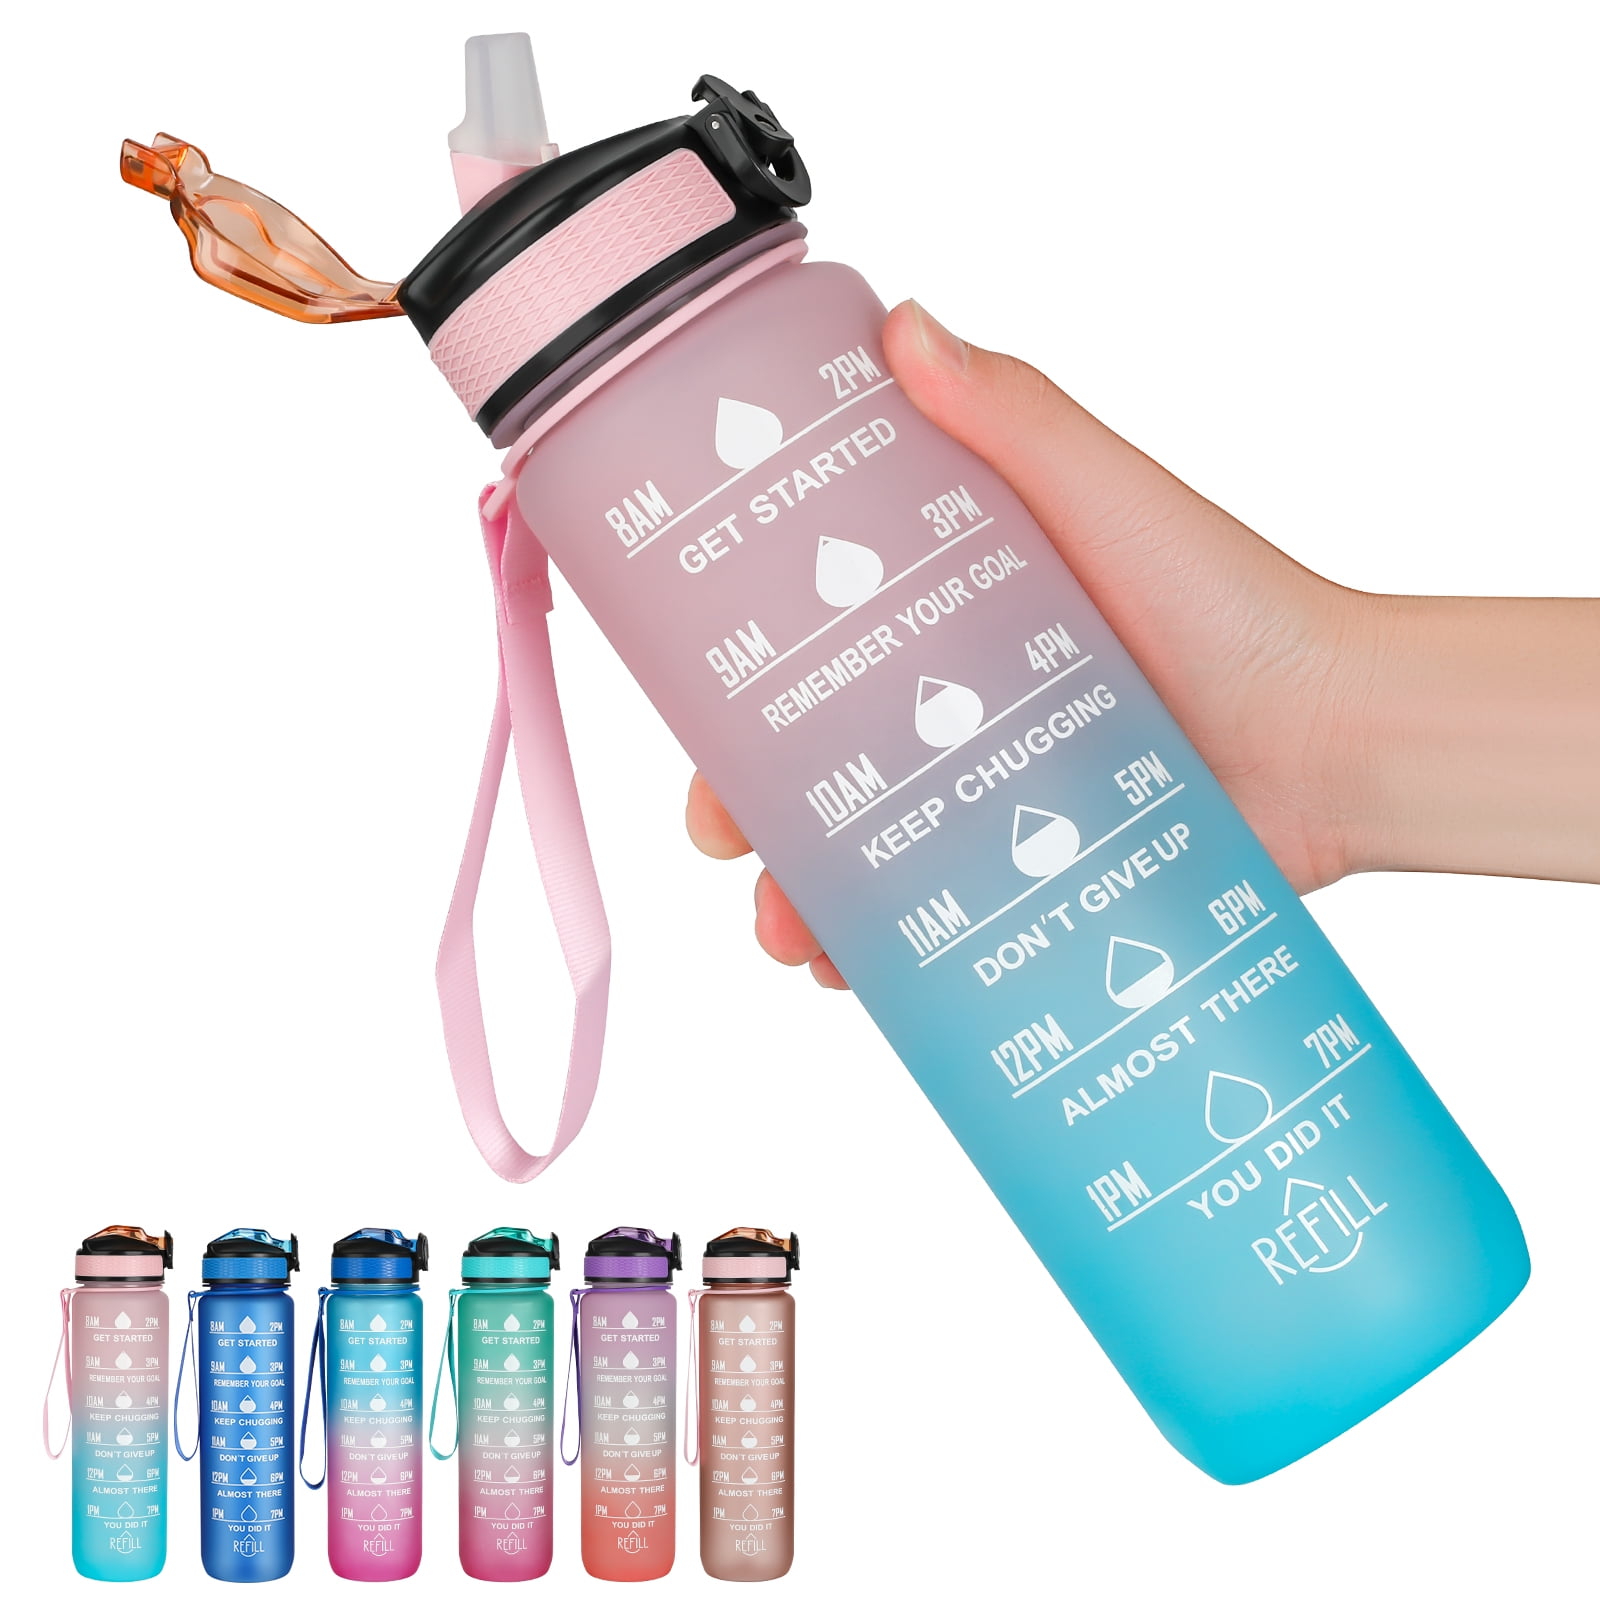 Sports Water Bottles 101oz, Motivational Water Bottle with